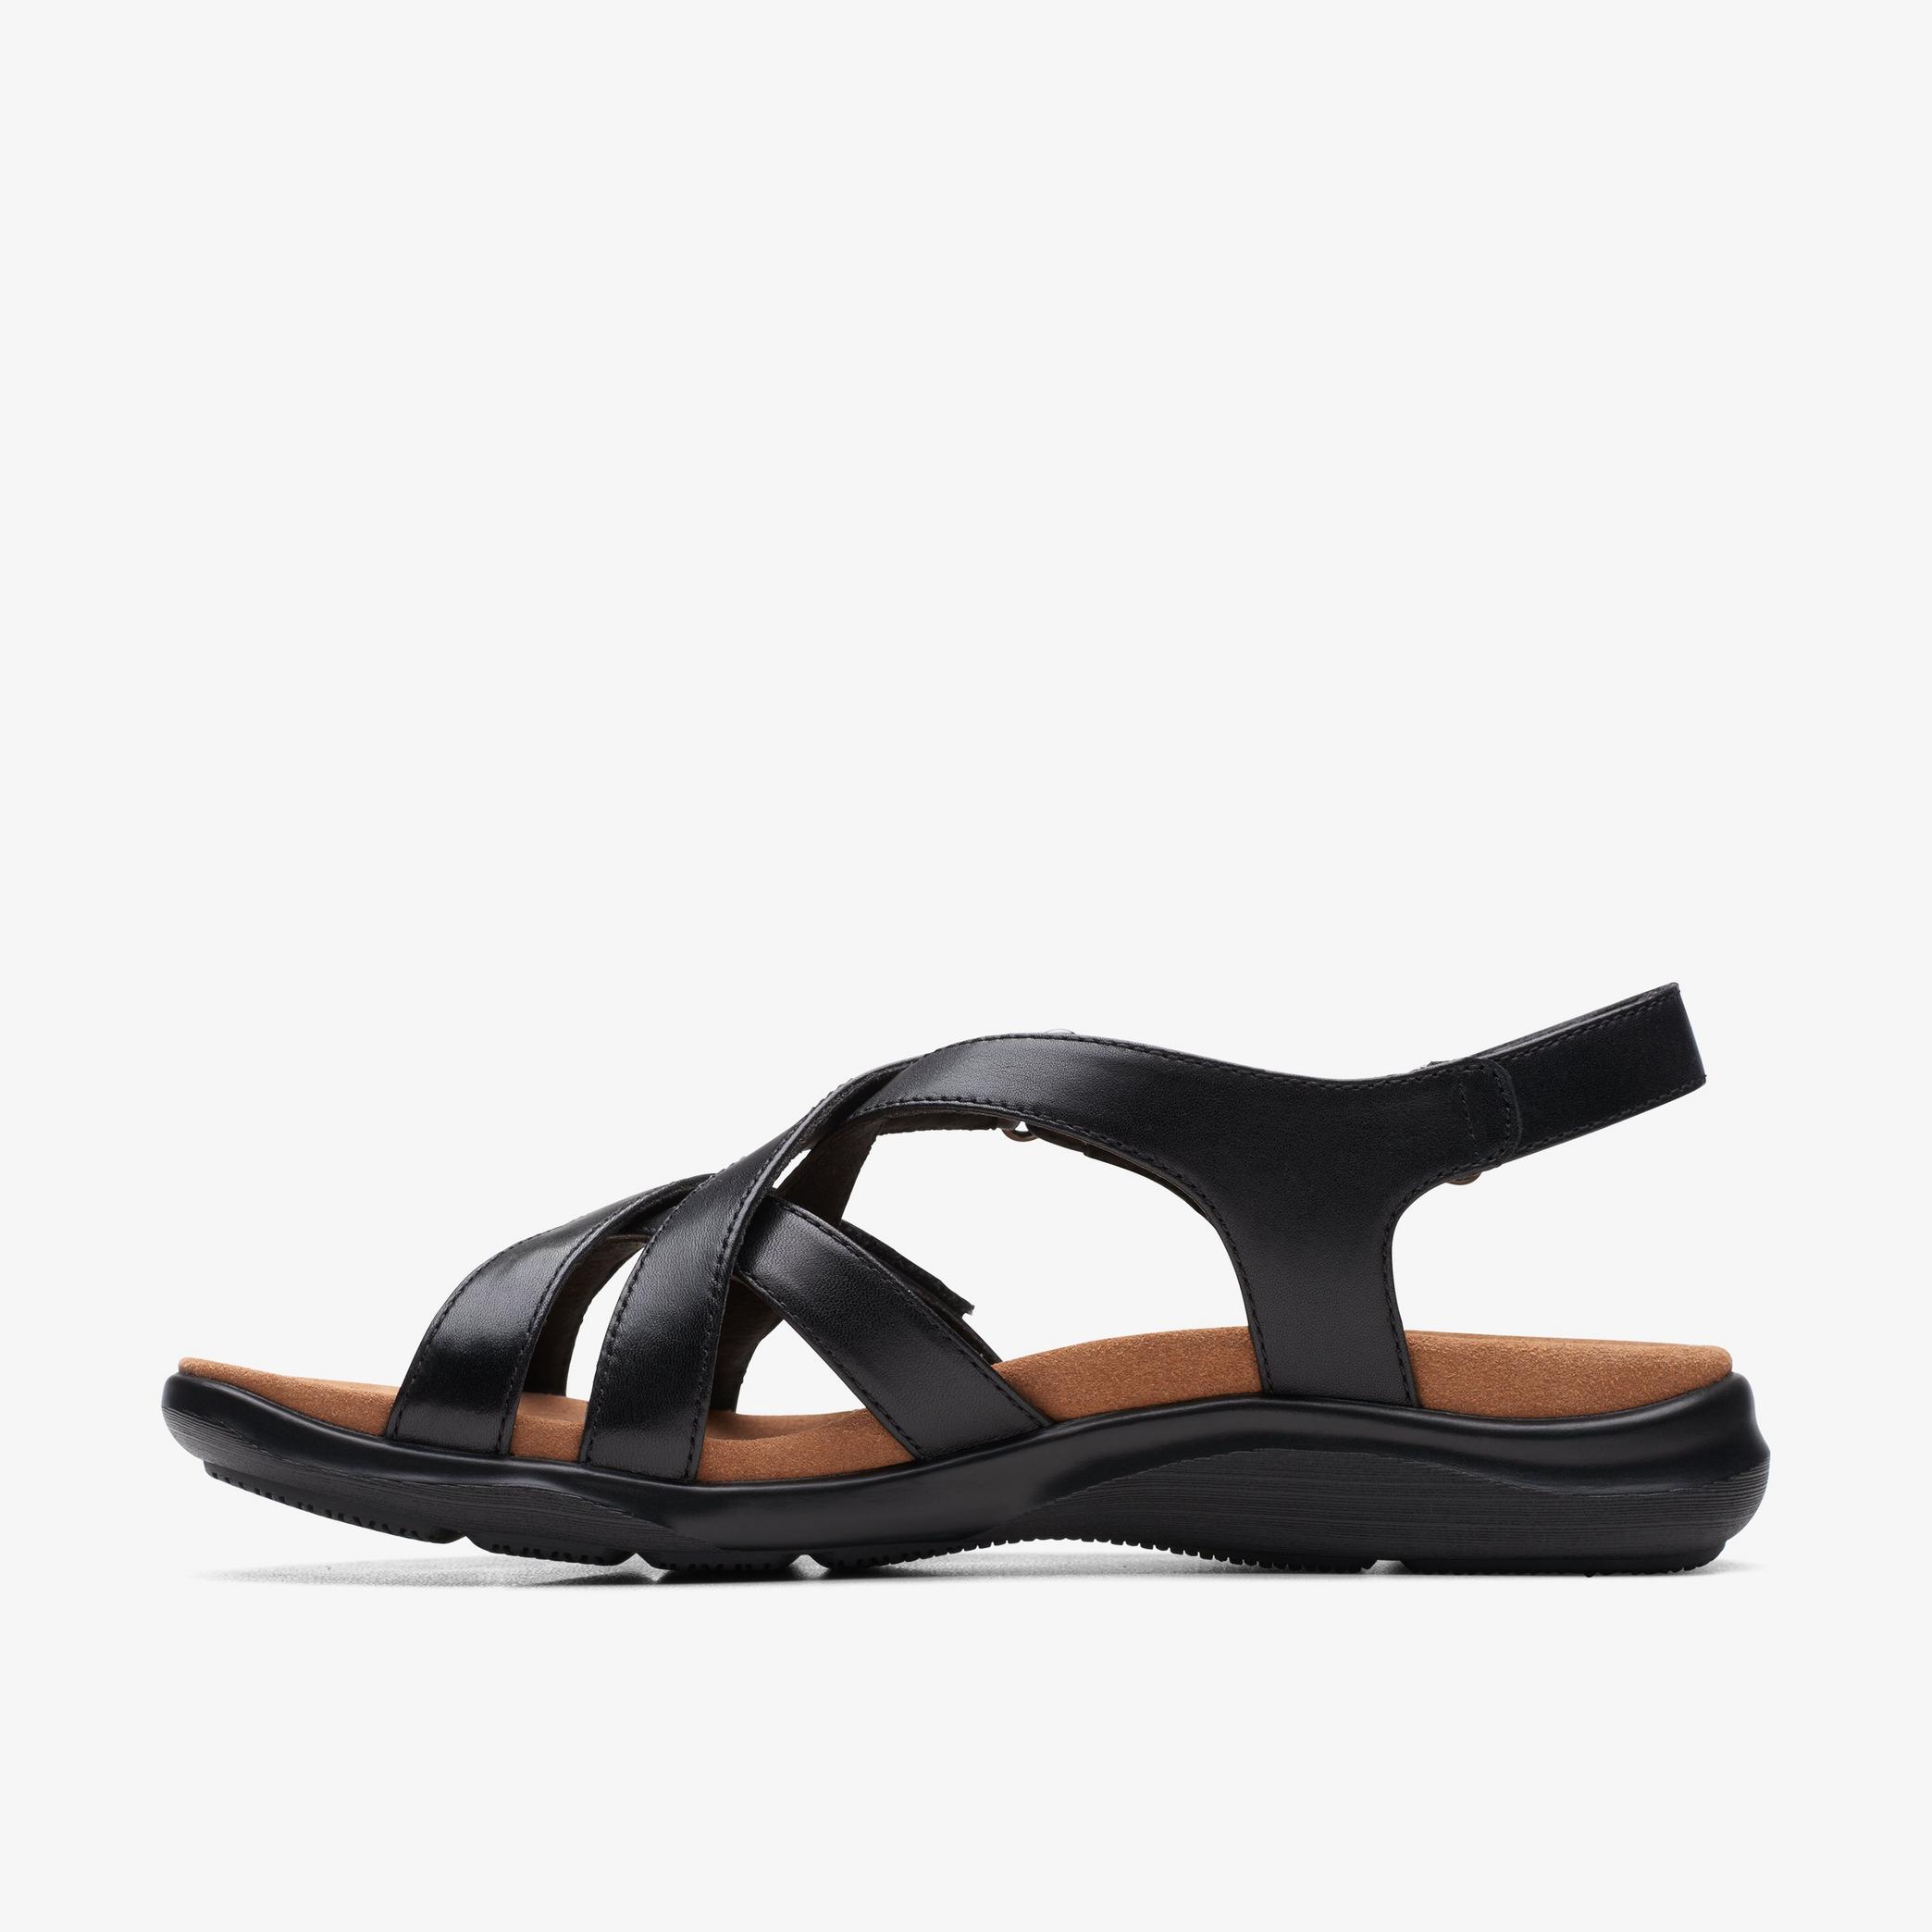 WOMENS Kitly Go Black Leather Flat Sandals | Clarks US